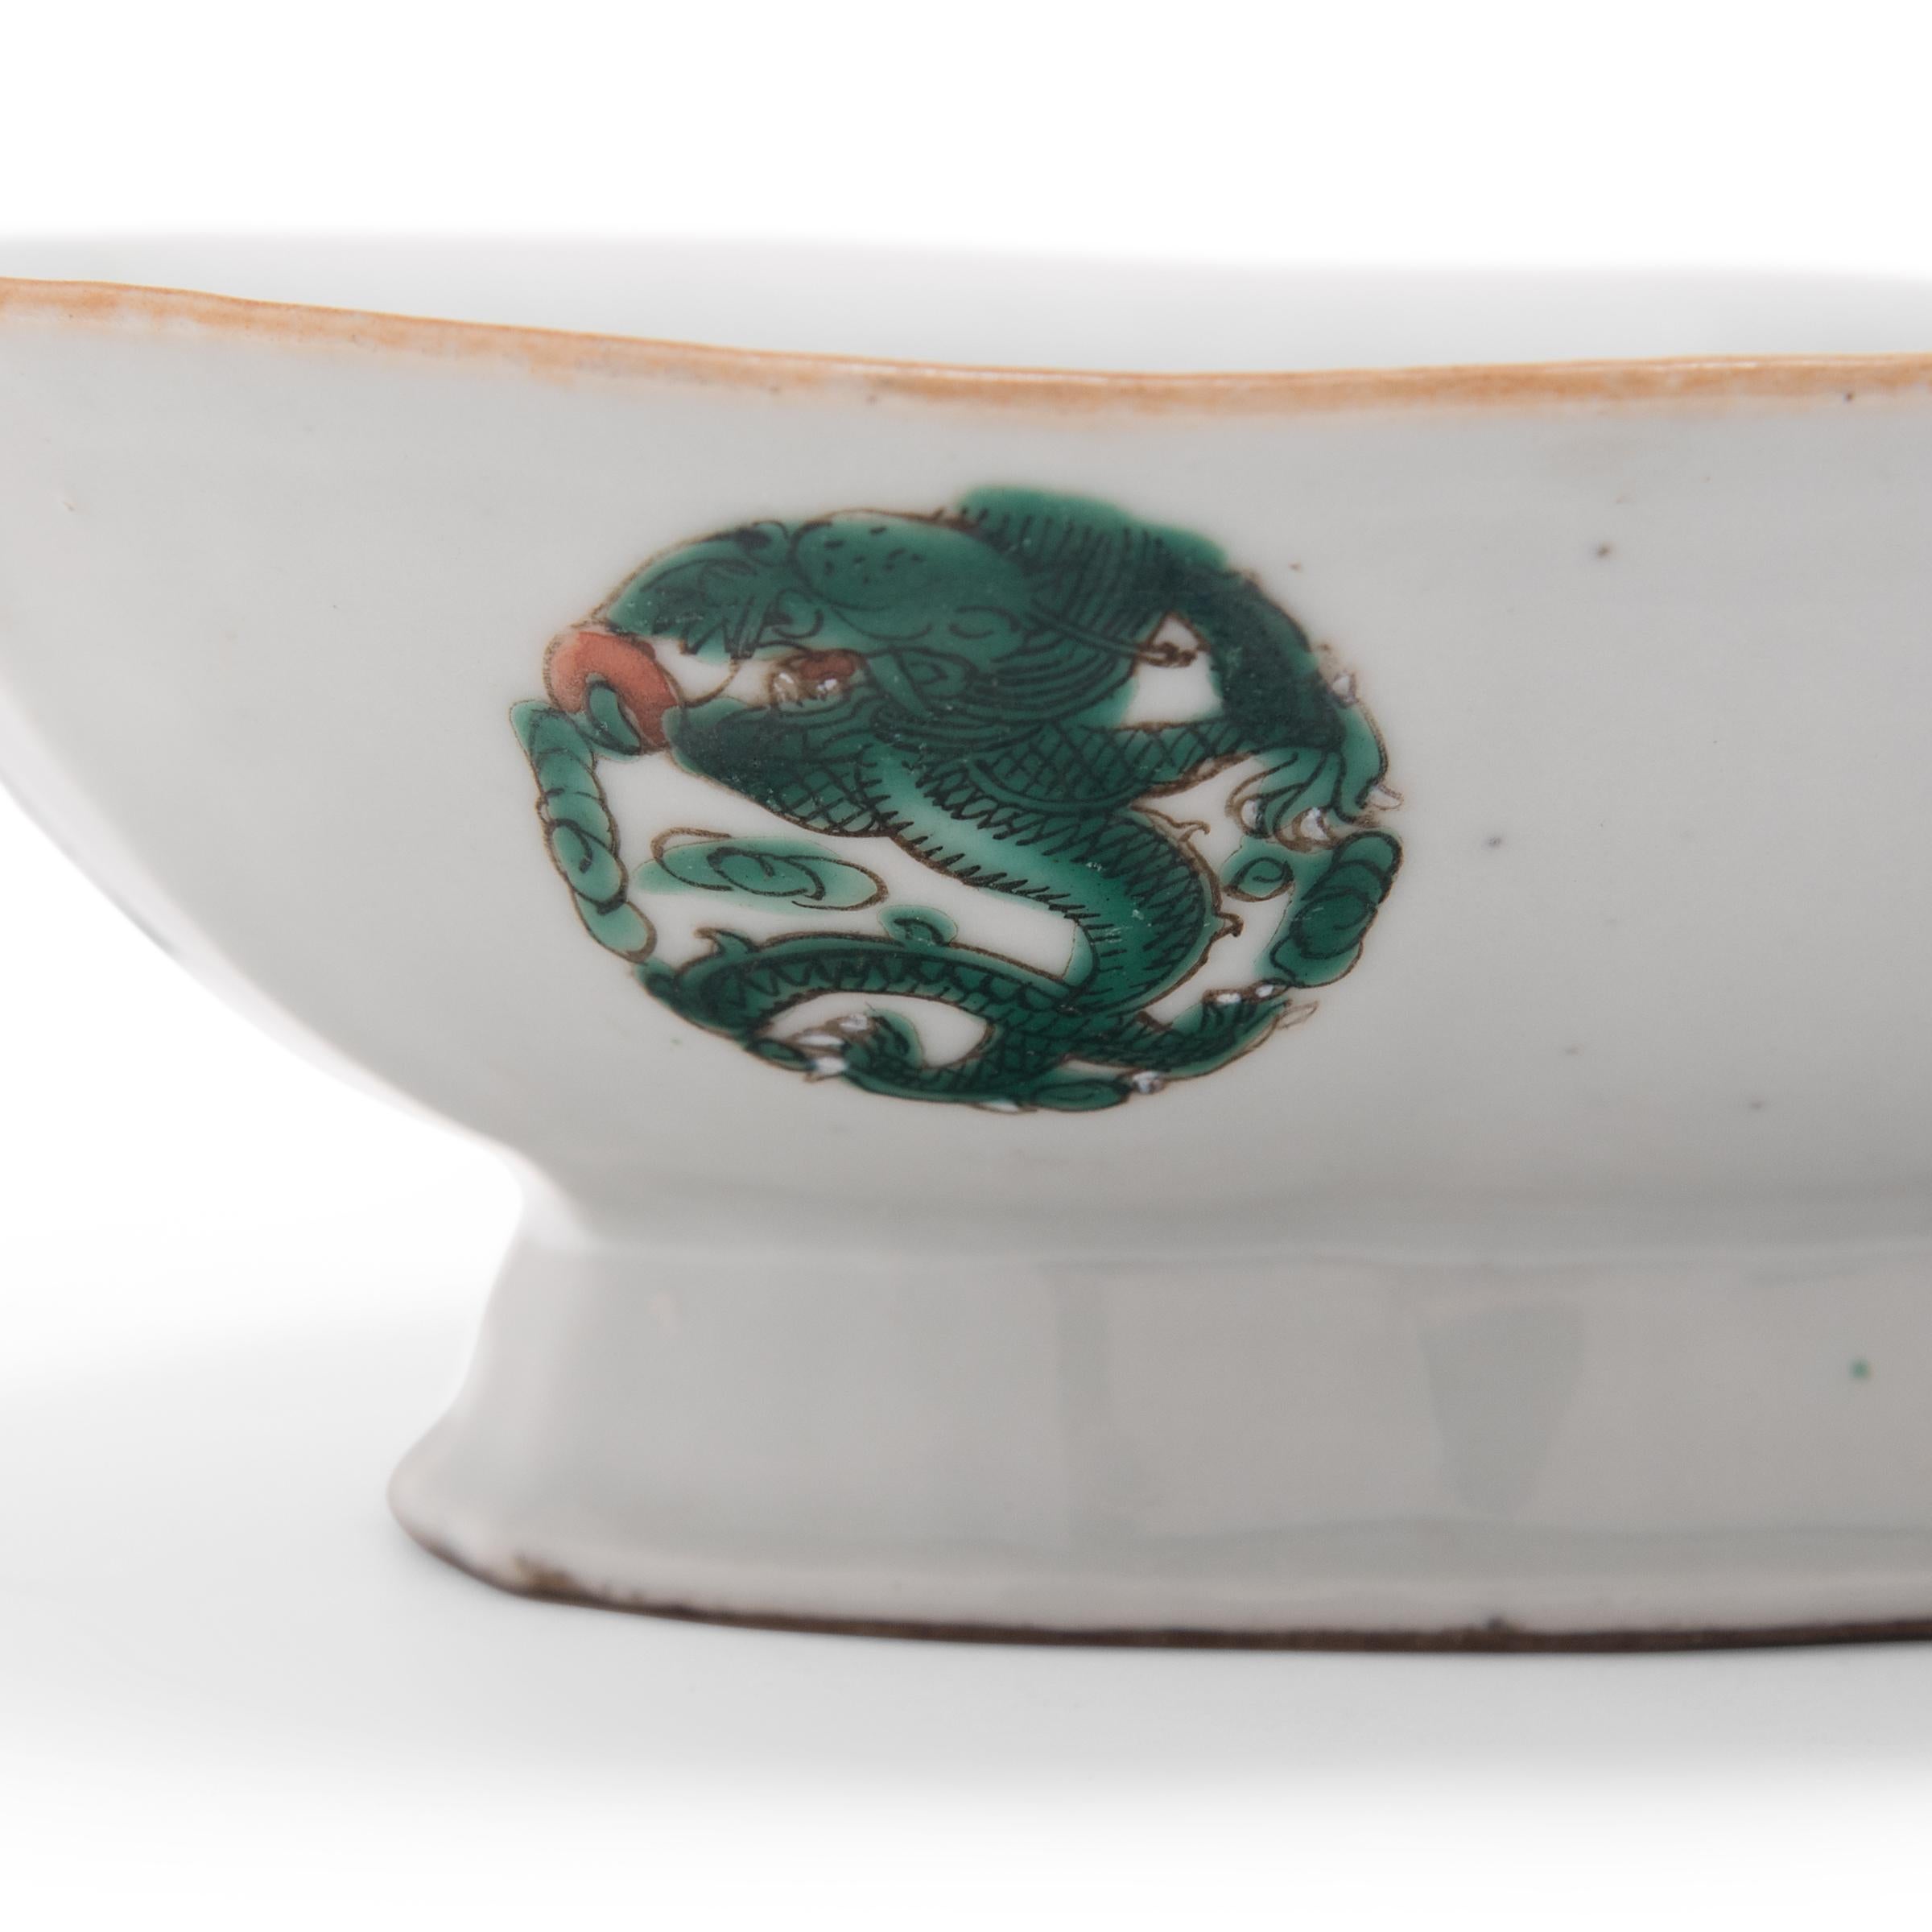 Porcelain Pair of Chinese Footed Offering Bowls with Celestial Dragons, c. 1850